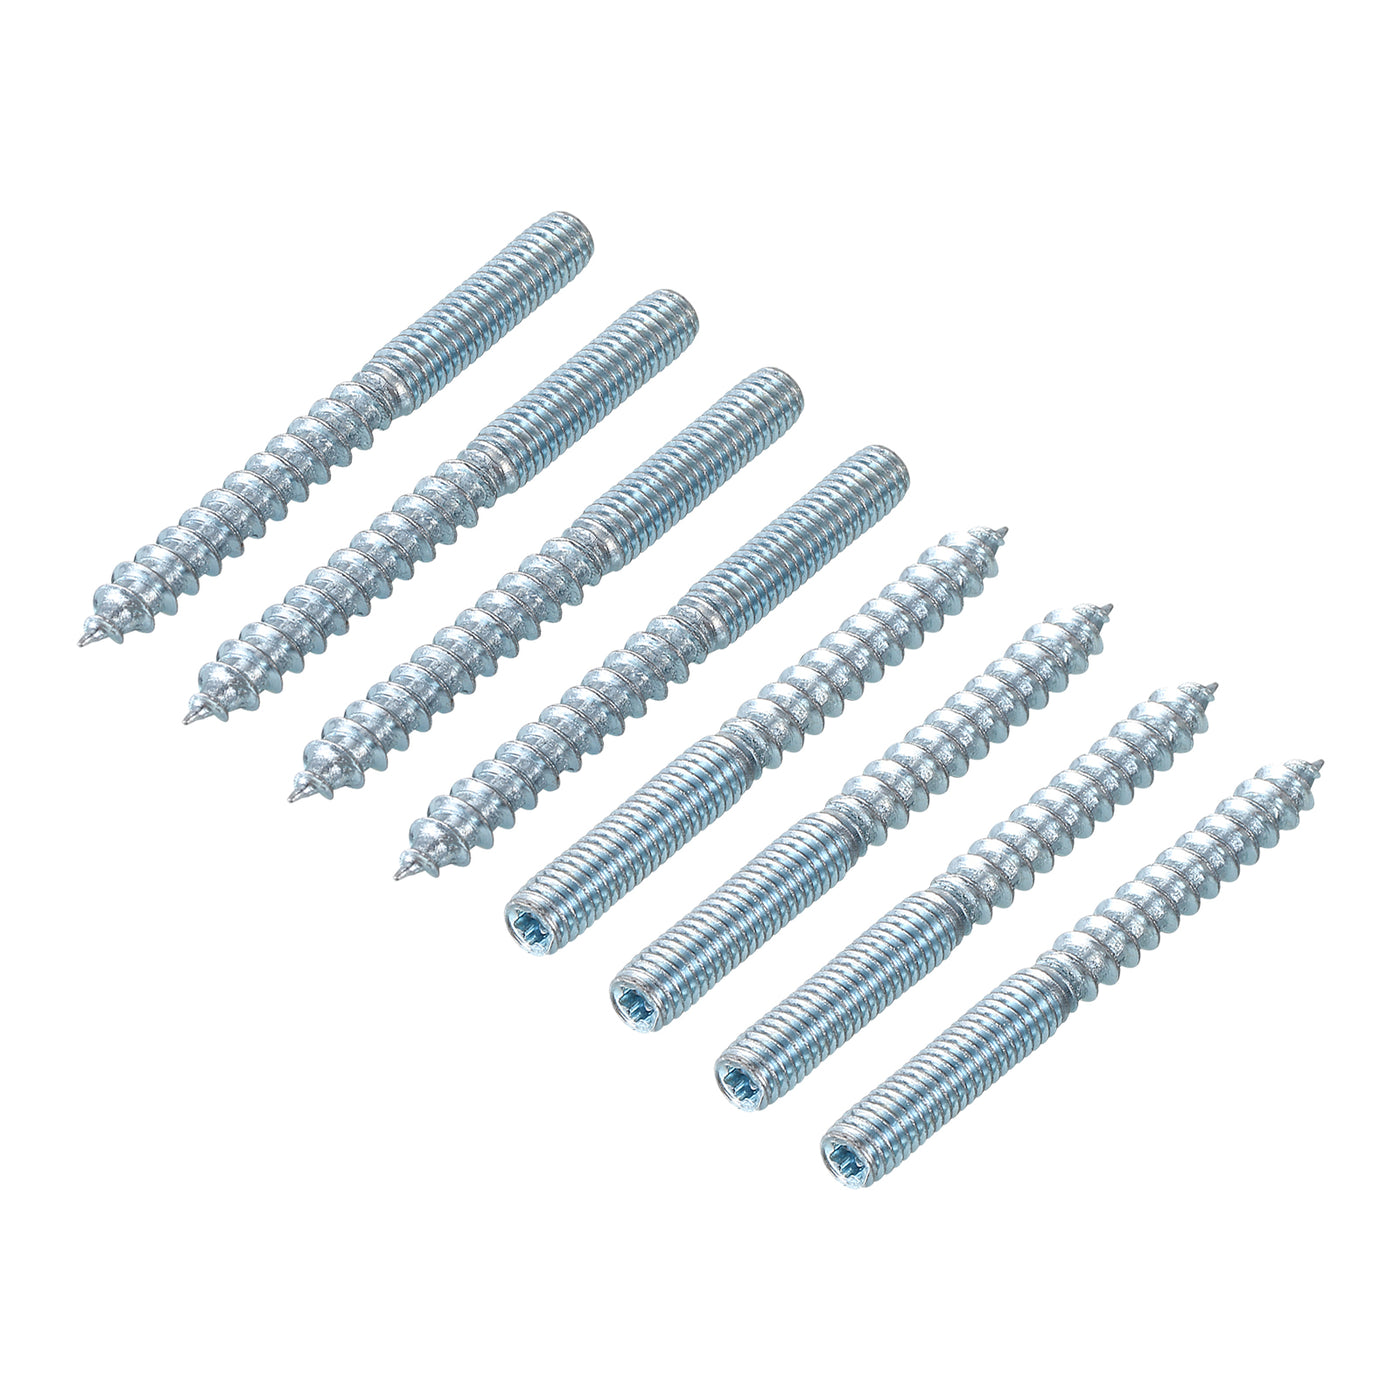 uxcell Uxcell 24Pcs M6x60mm Hanger Bolt Double Headed Bolt Self-Tapping Screw for Furniture